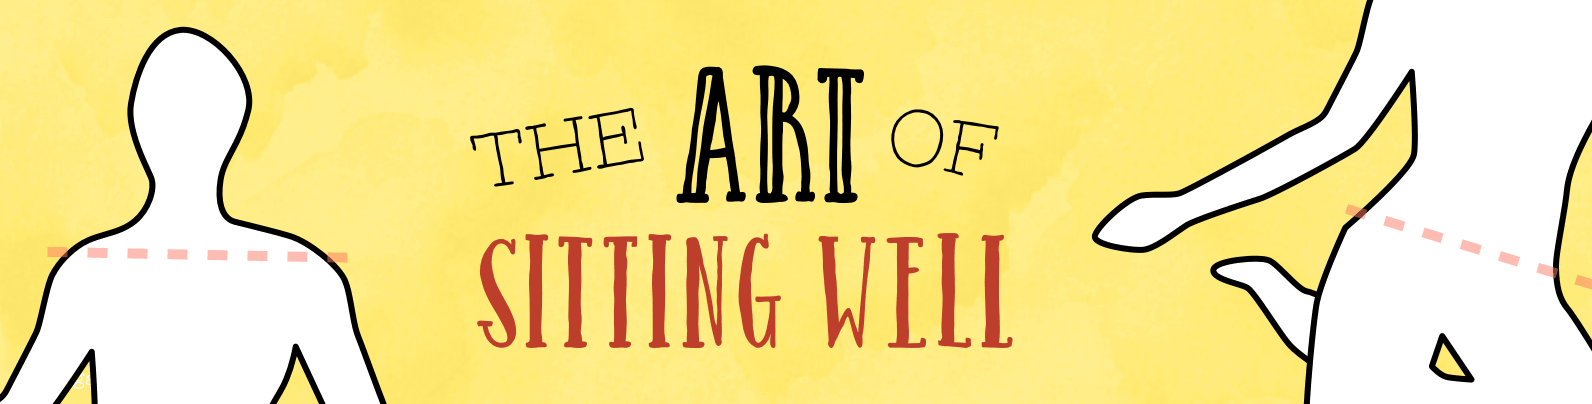 The Art of Sitting Well